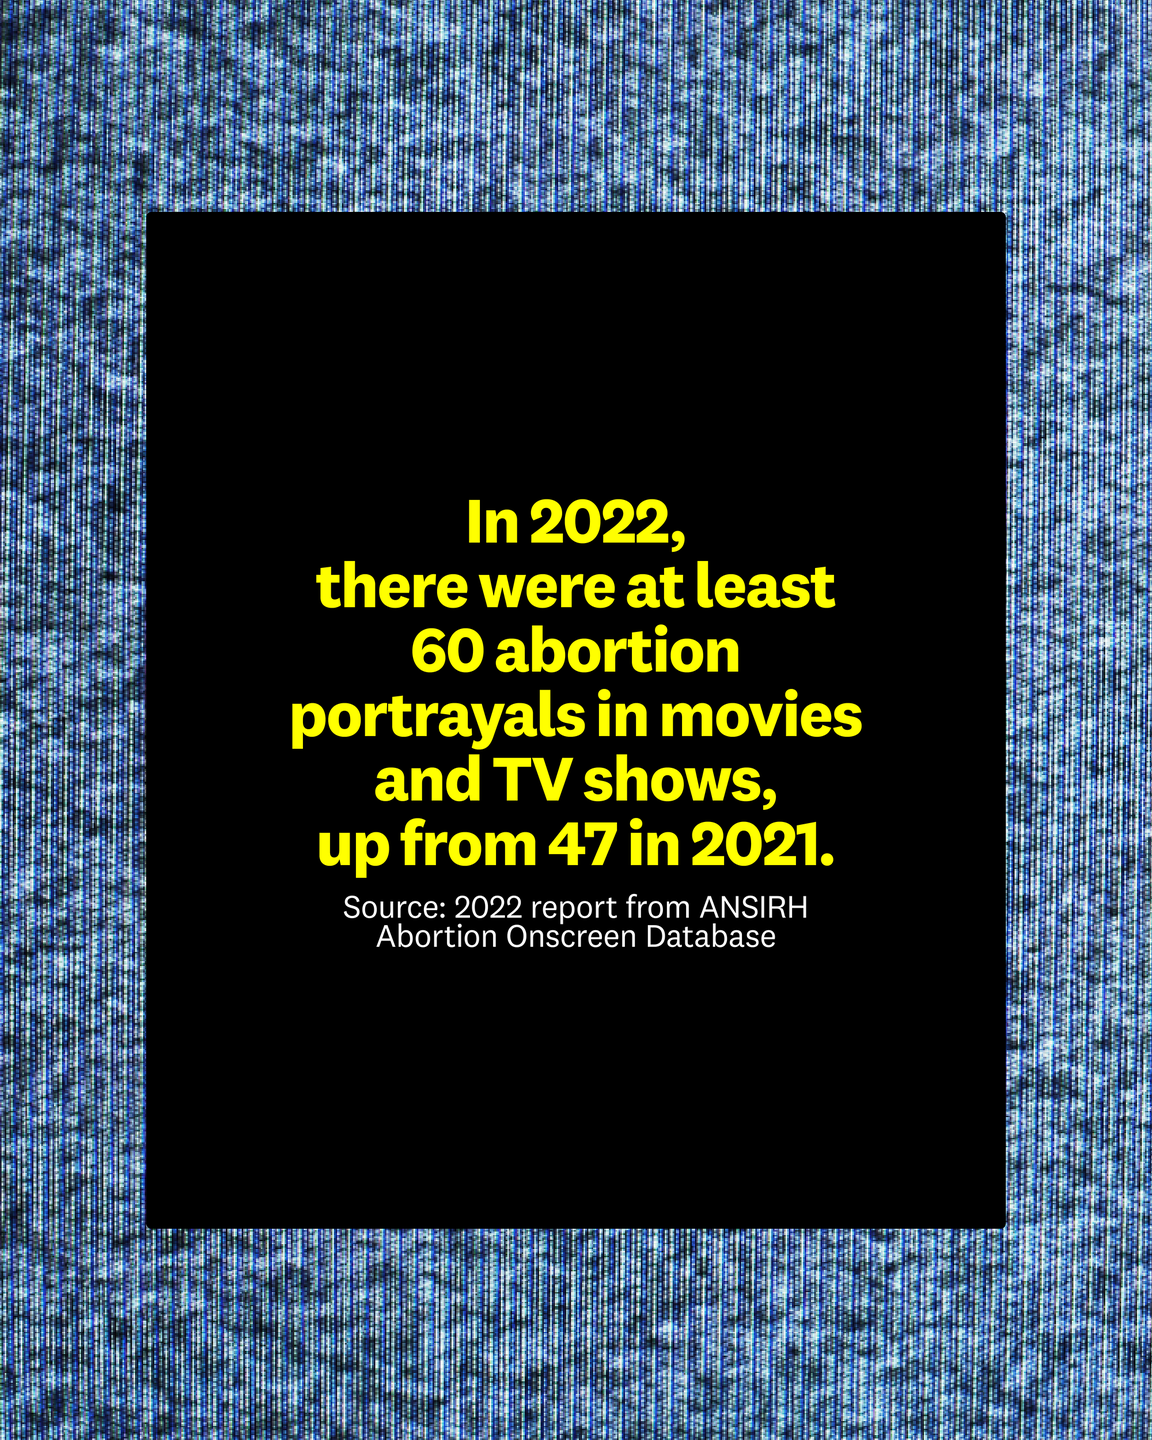 in 2022, there were at least 60 abortion portrayals in movies and tv shows, up from 47 in 2021